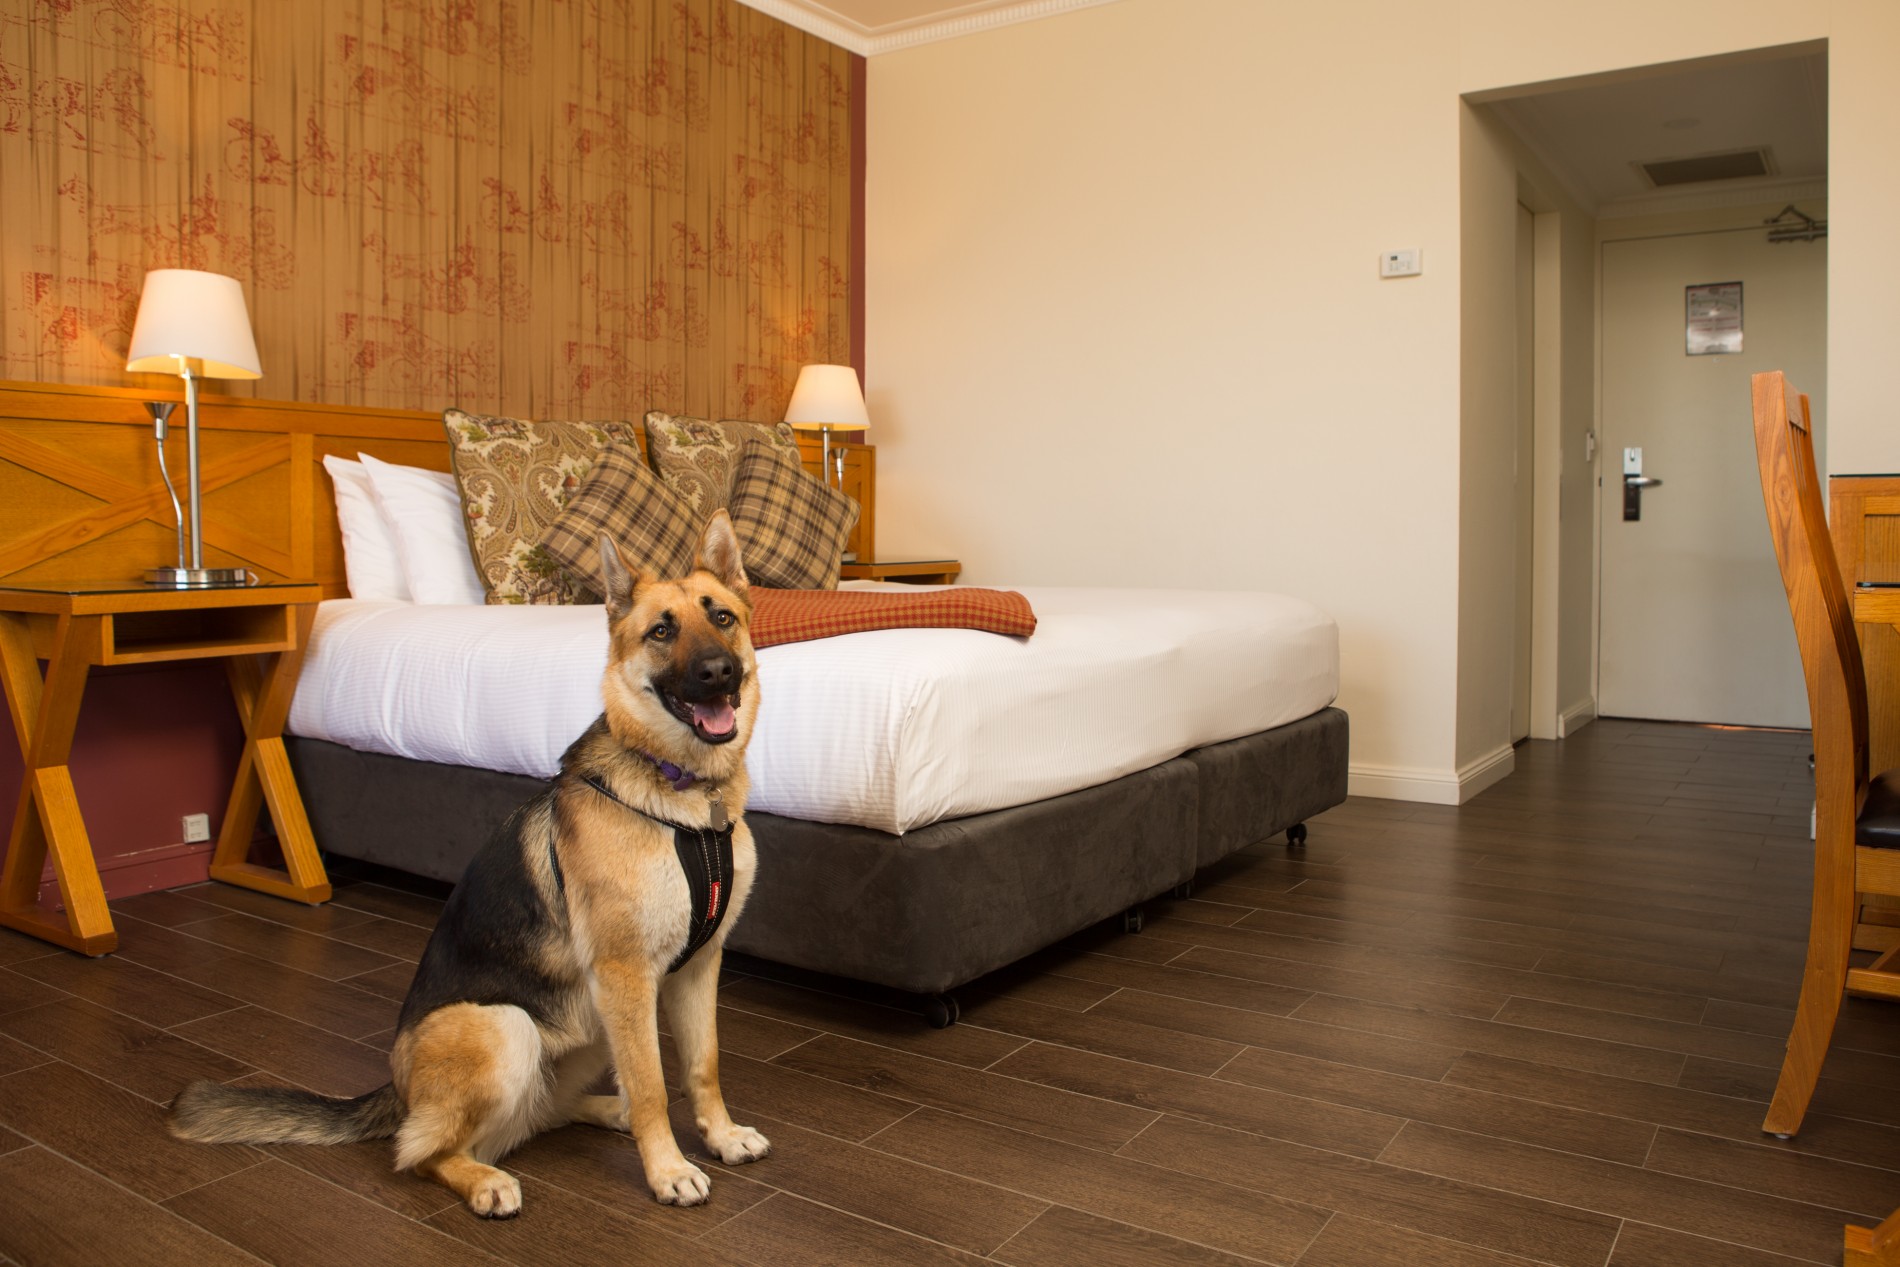 Holidaying With Dogs - Pet Friendly Accommodation, Hotels & Rentals